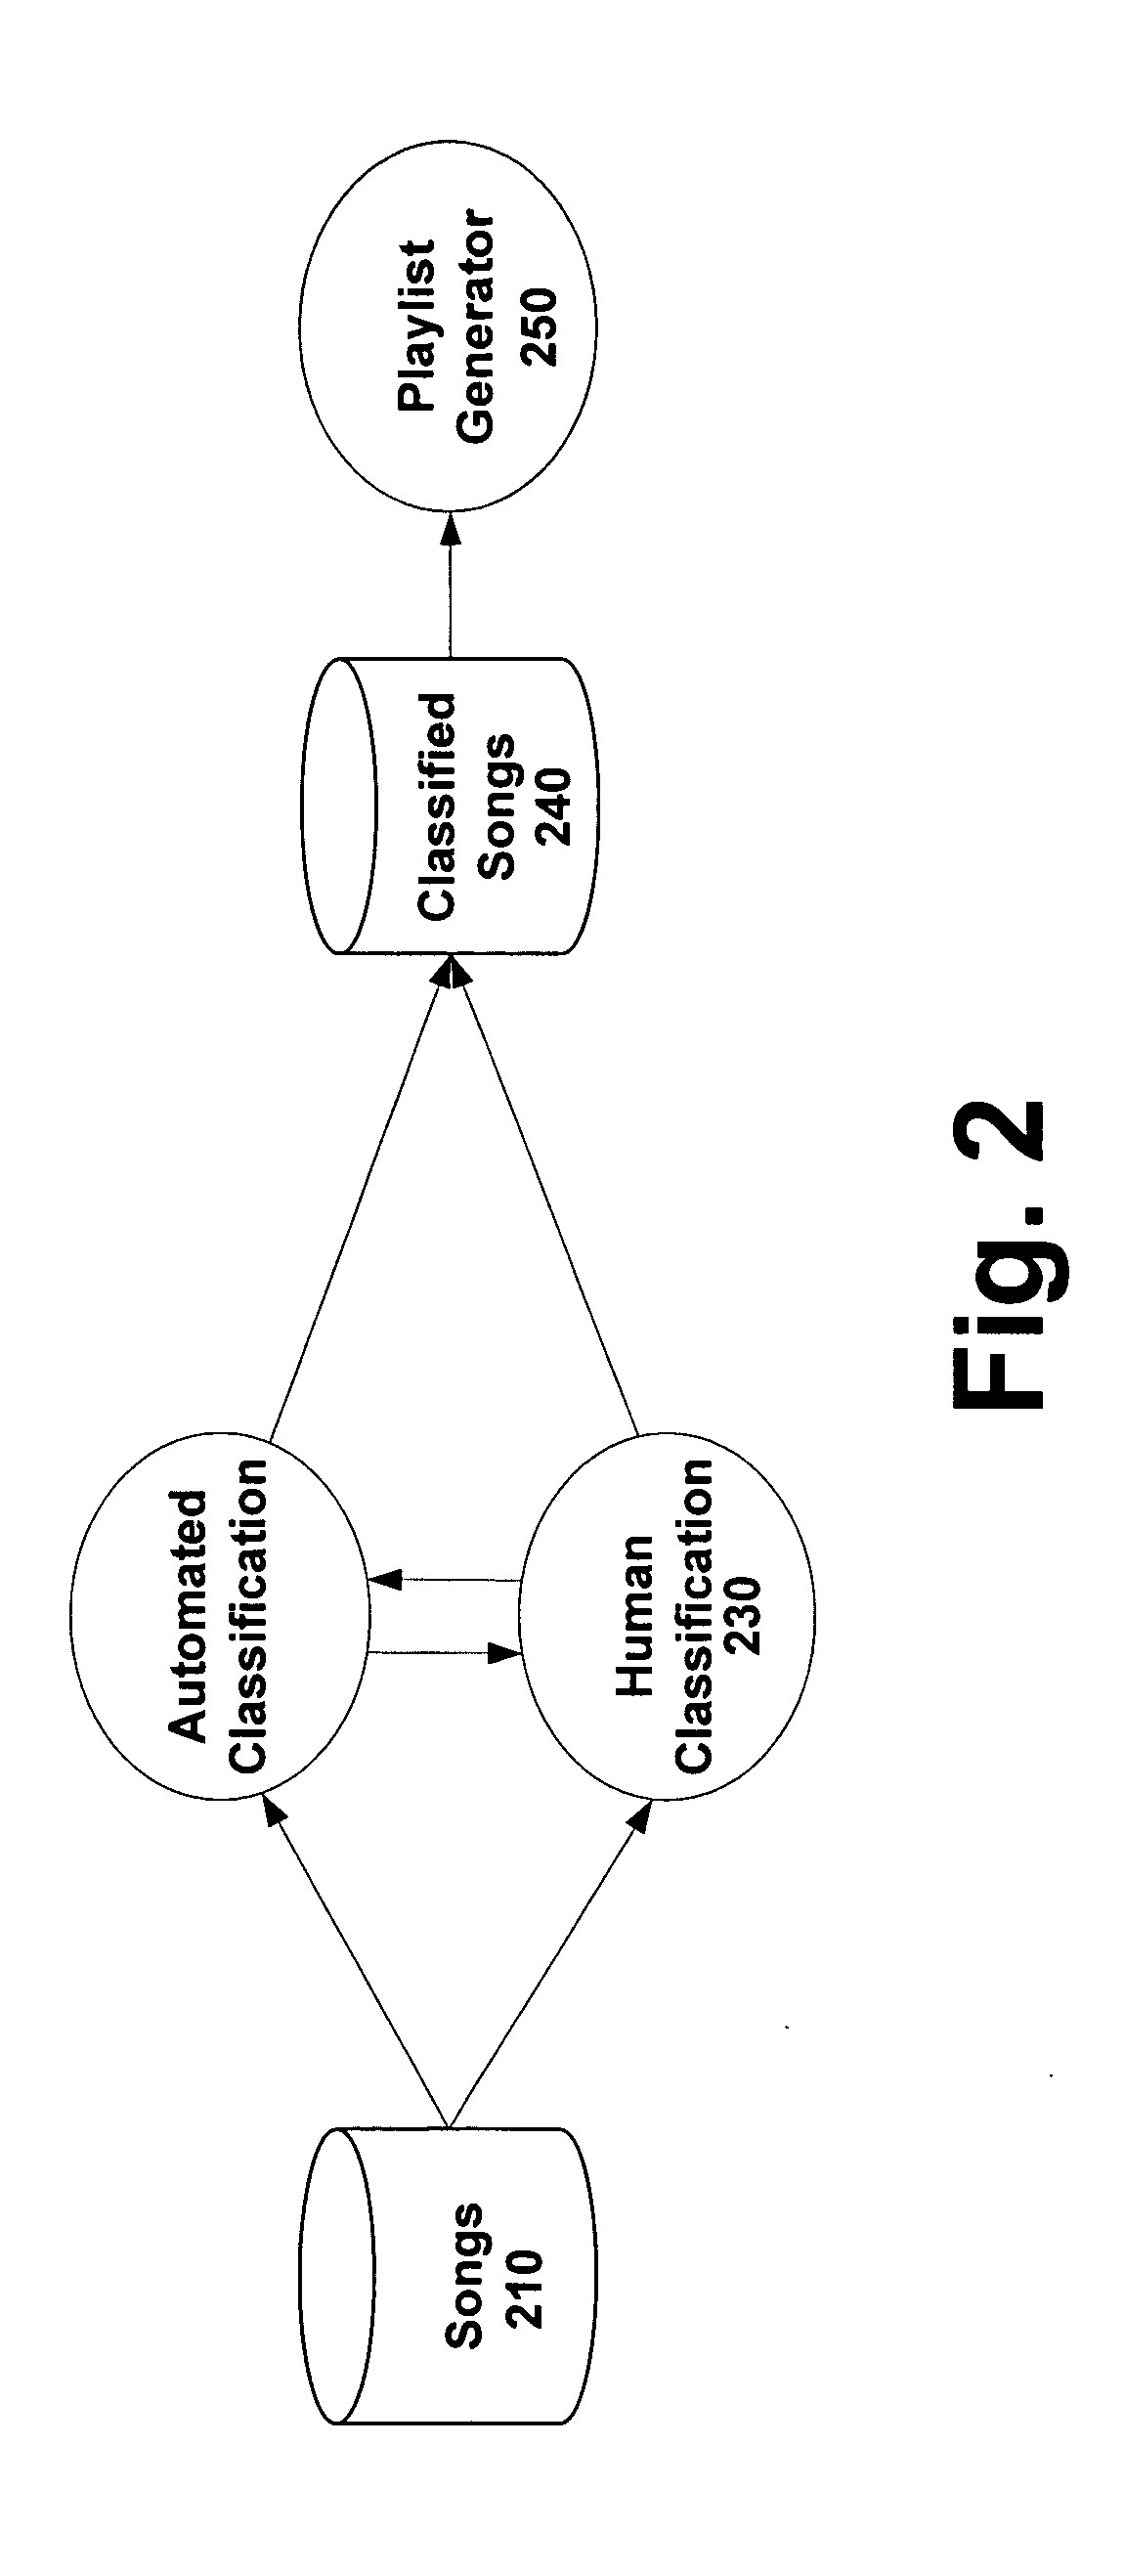 System and methods for providing automatic classification of media entities according to consonance properties